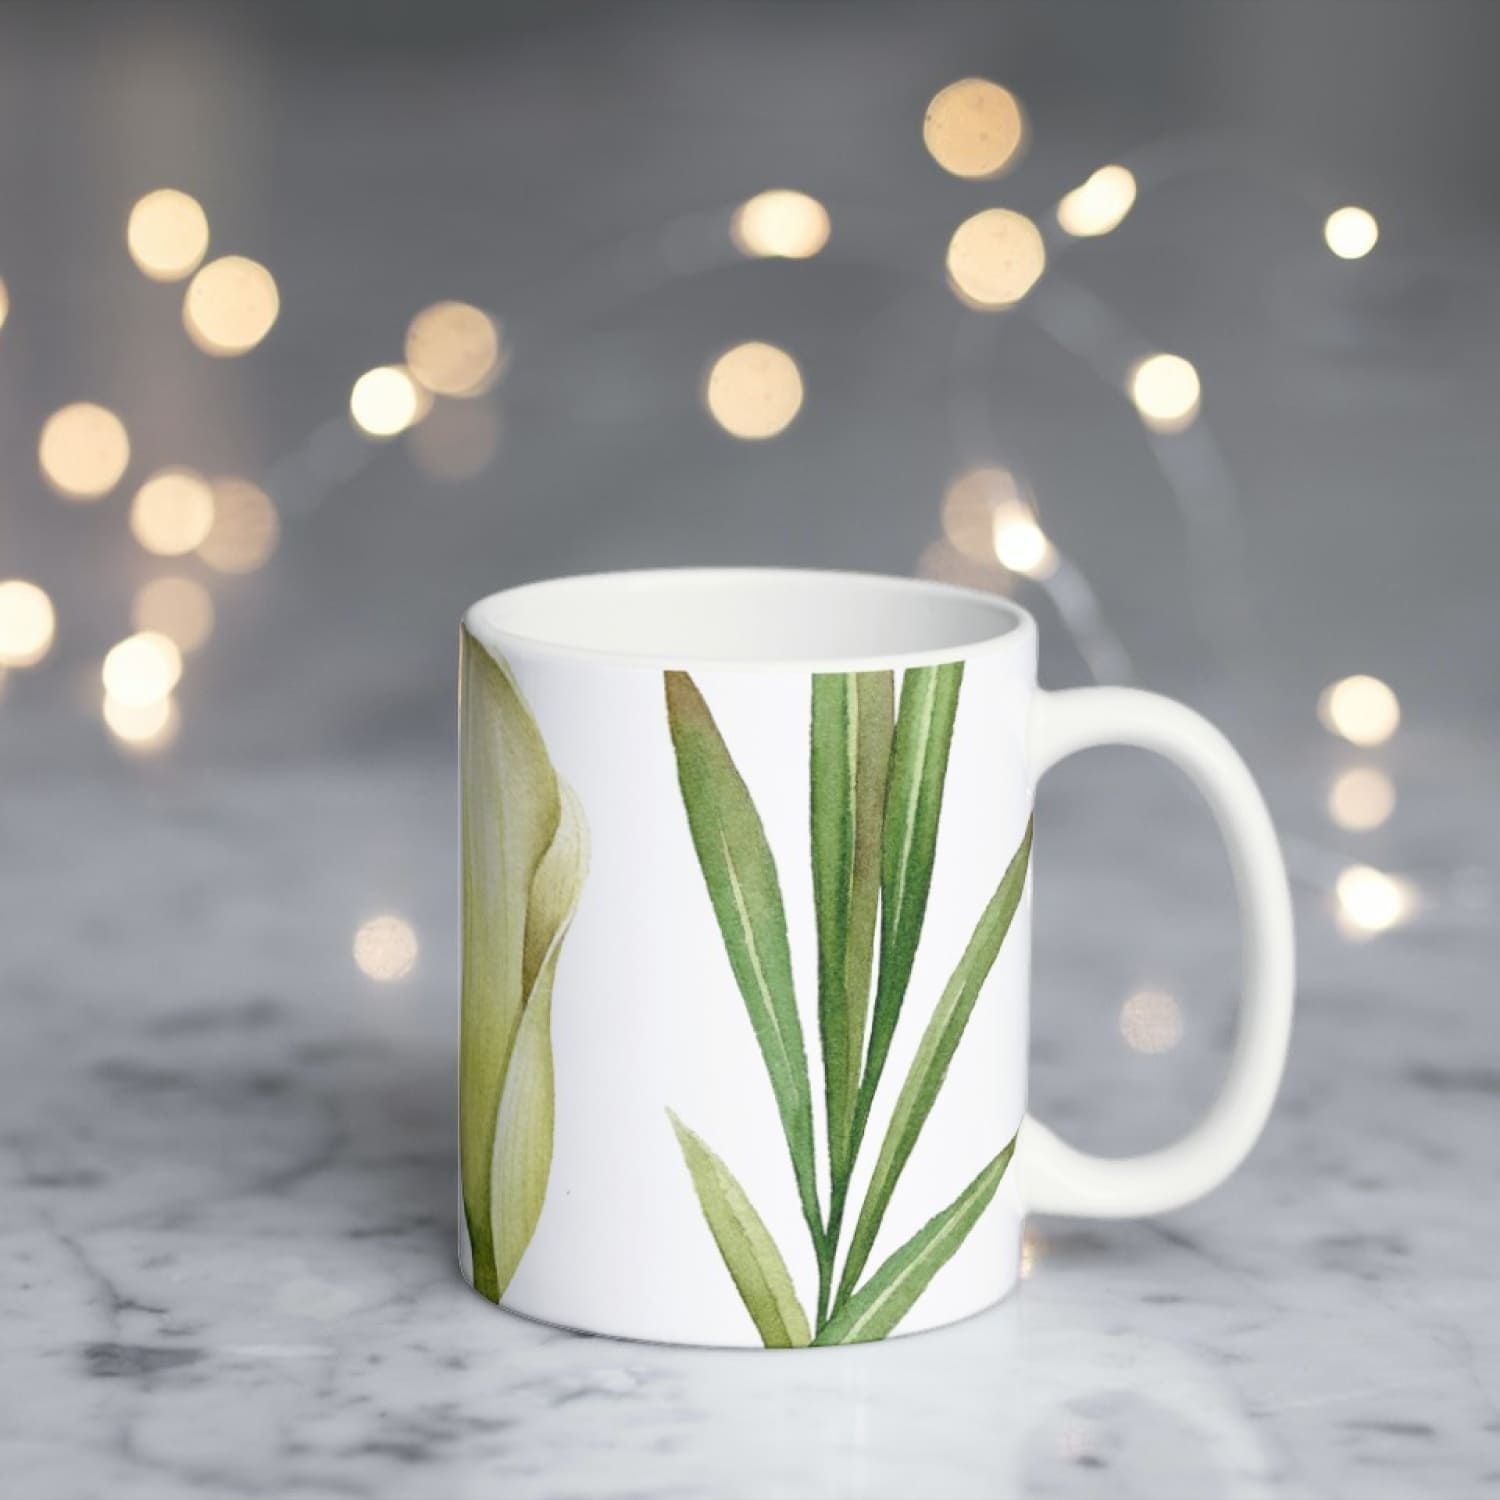 Cute calla lily elements for a cup.